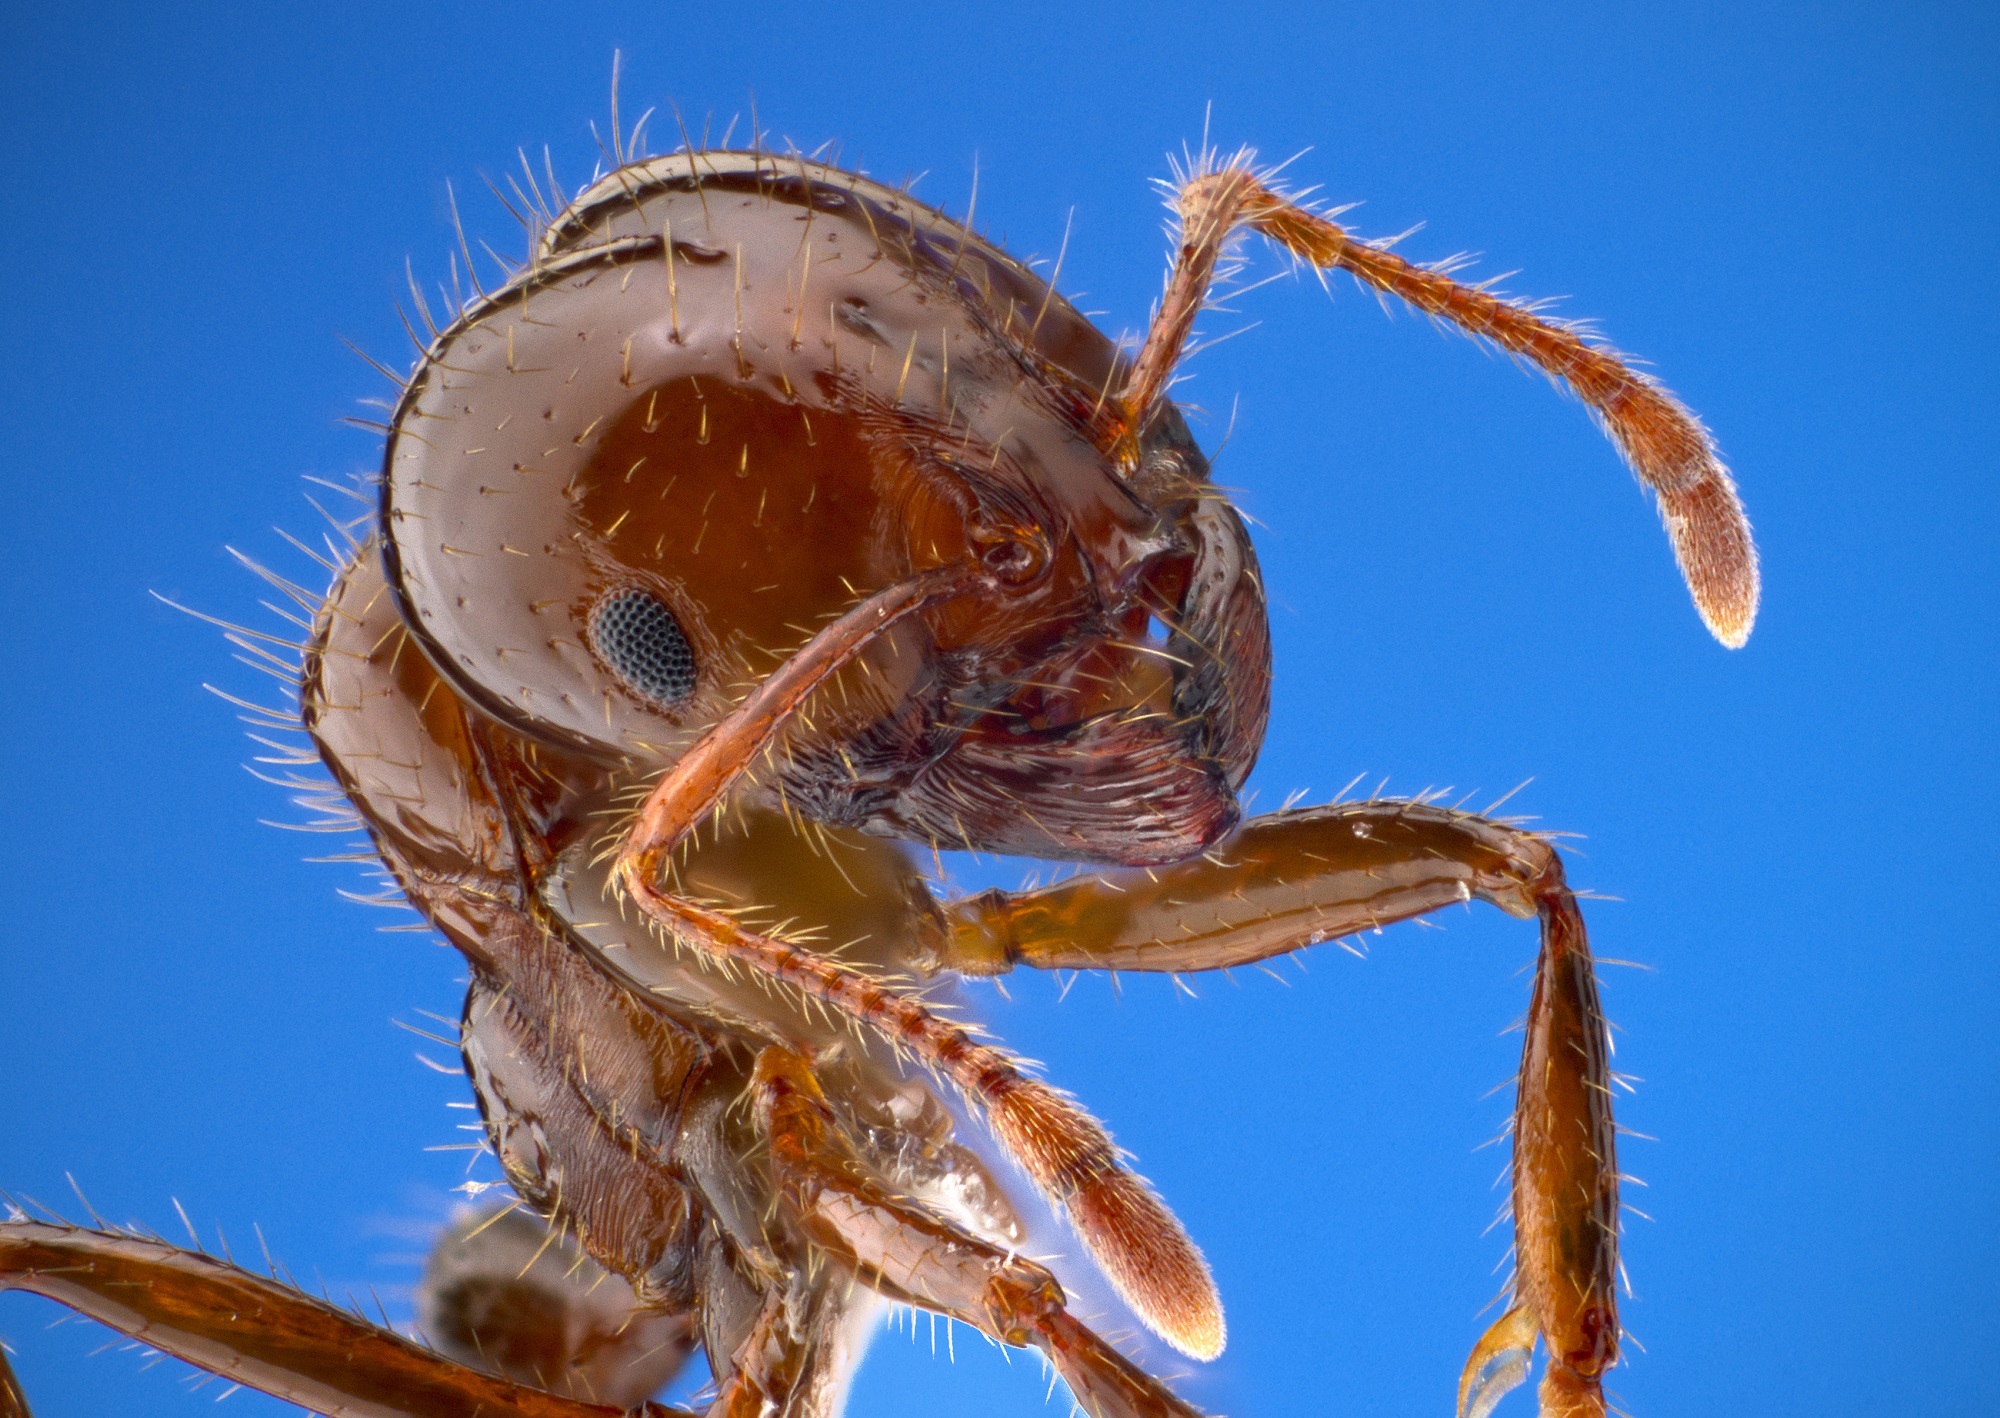 Fire Ant, Animal, Ant, Fire, Insect, HQ Photo